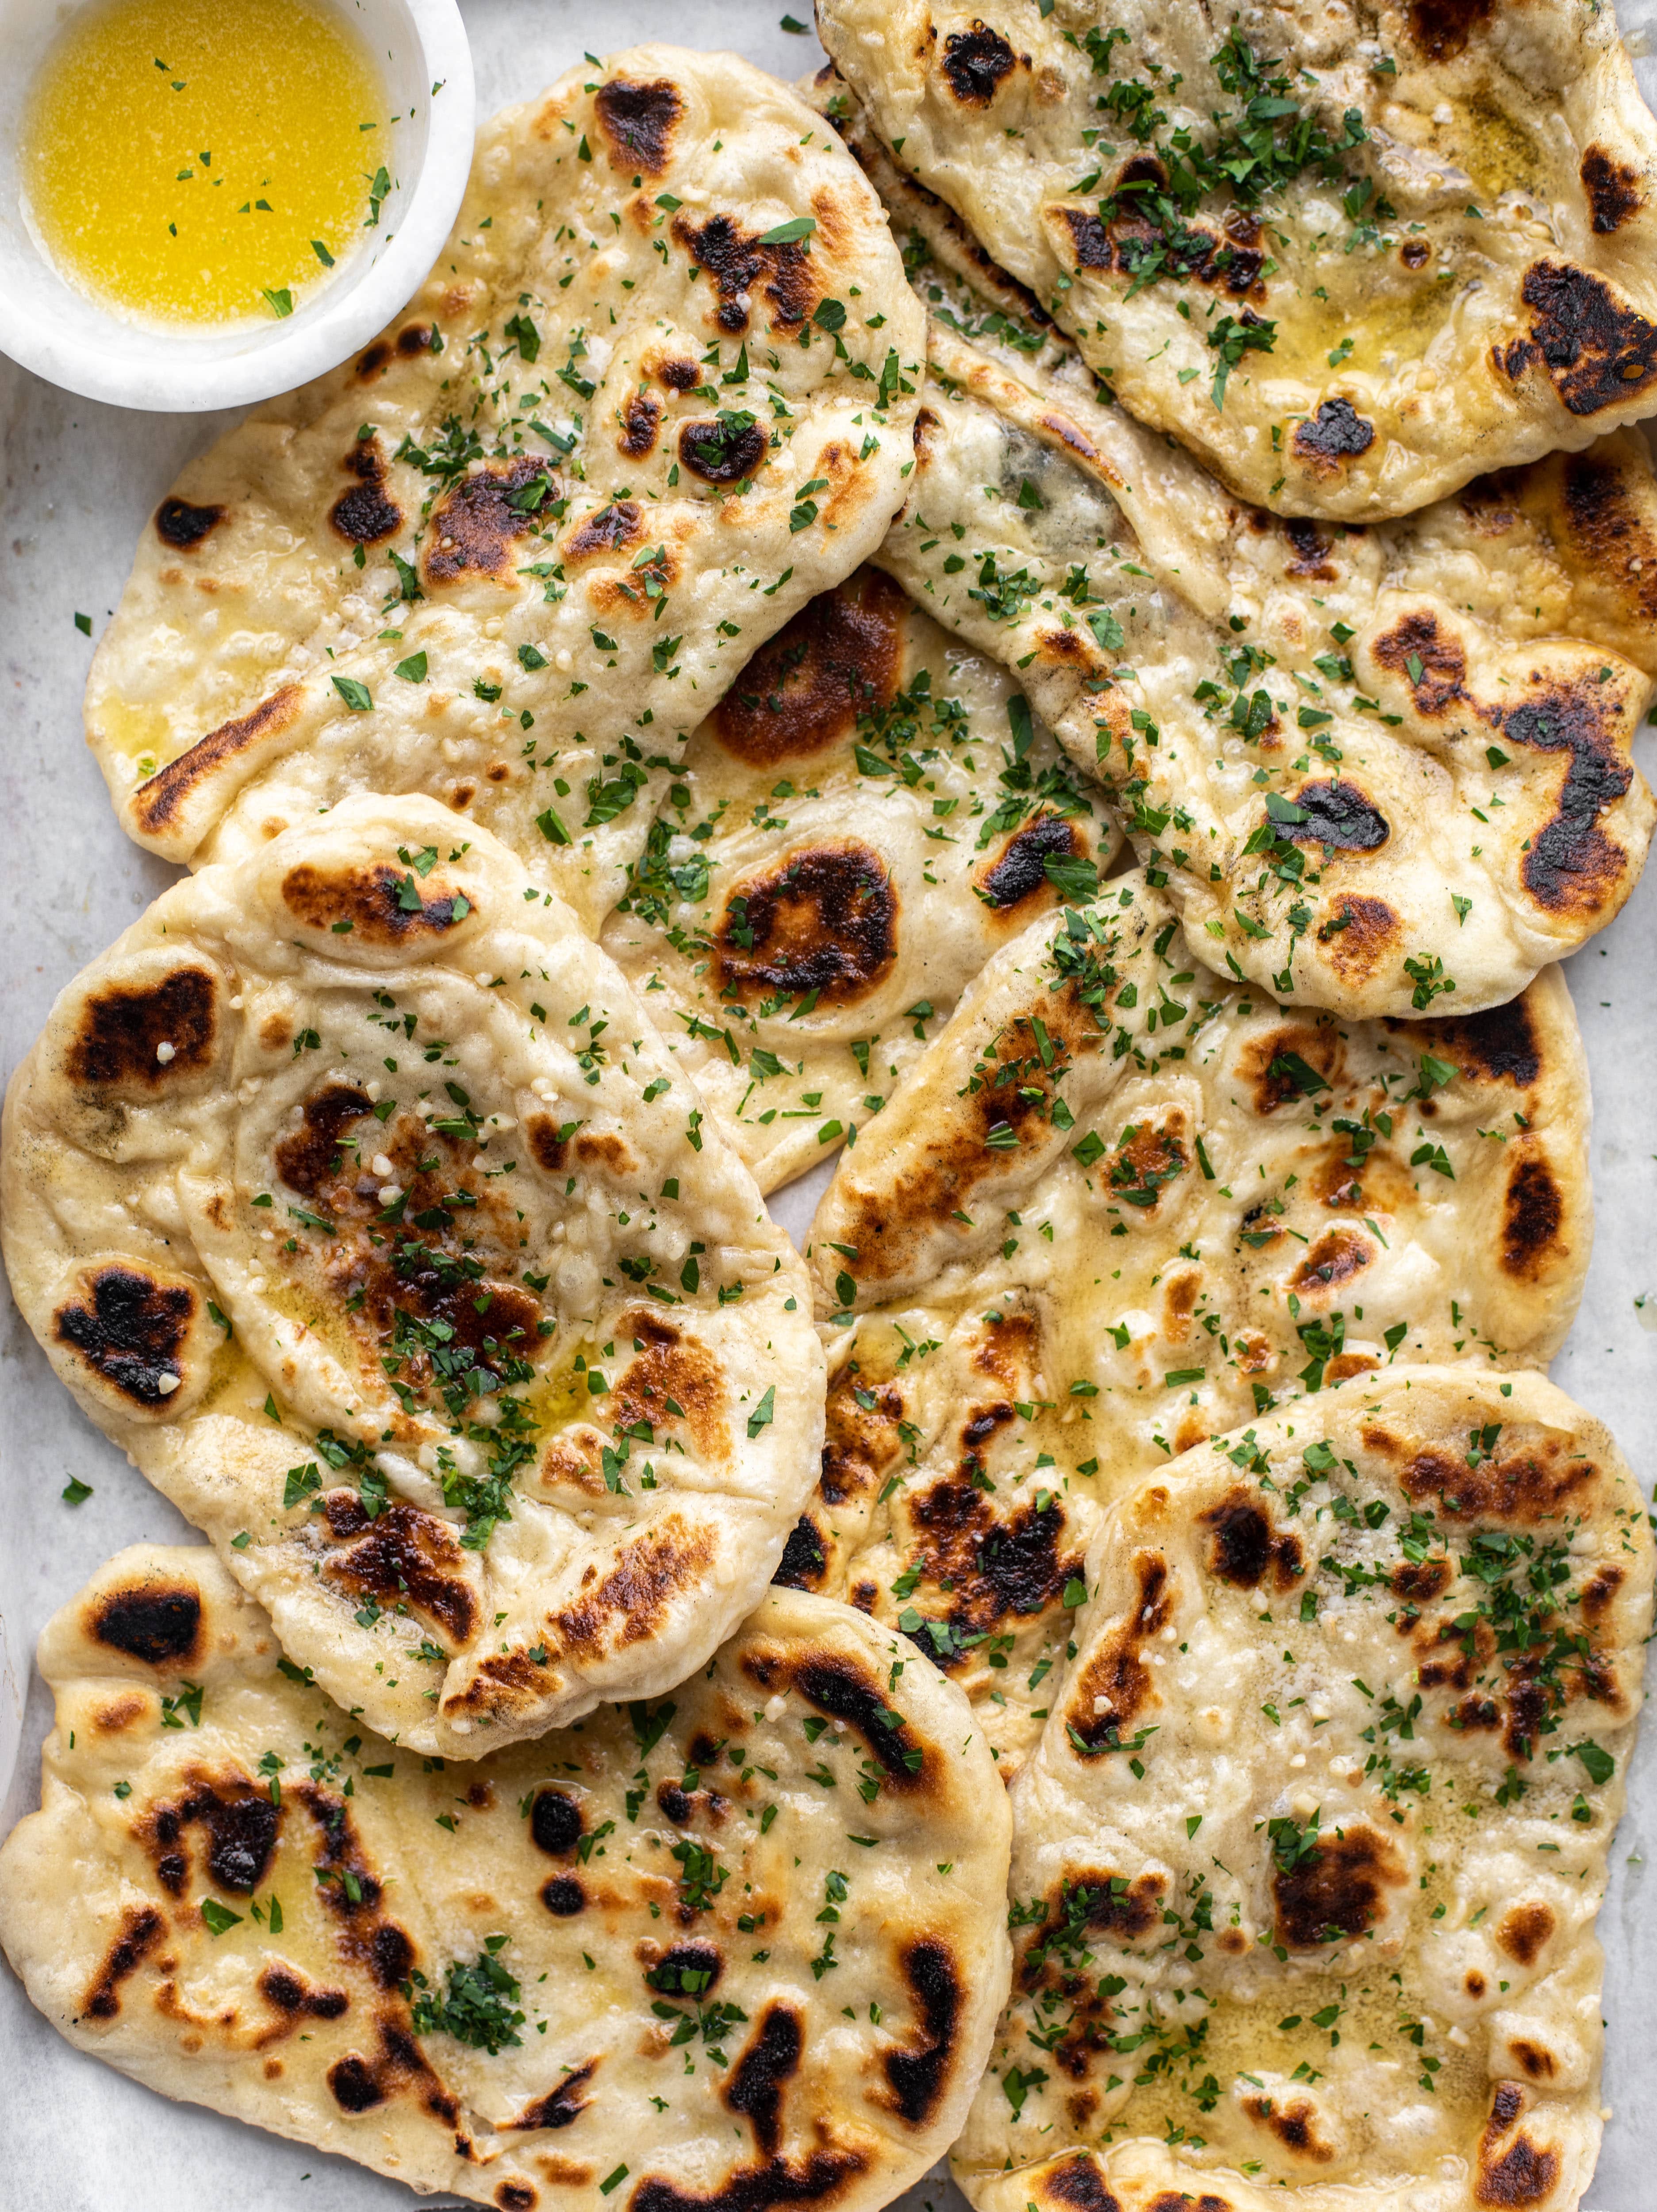 This garlic butter naan bread recipe is divine! It uses baking powder and baking soda instead of yeast and is drenched with garlic butter. So delicious!